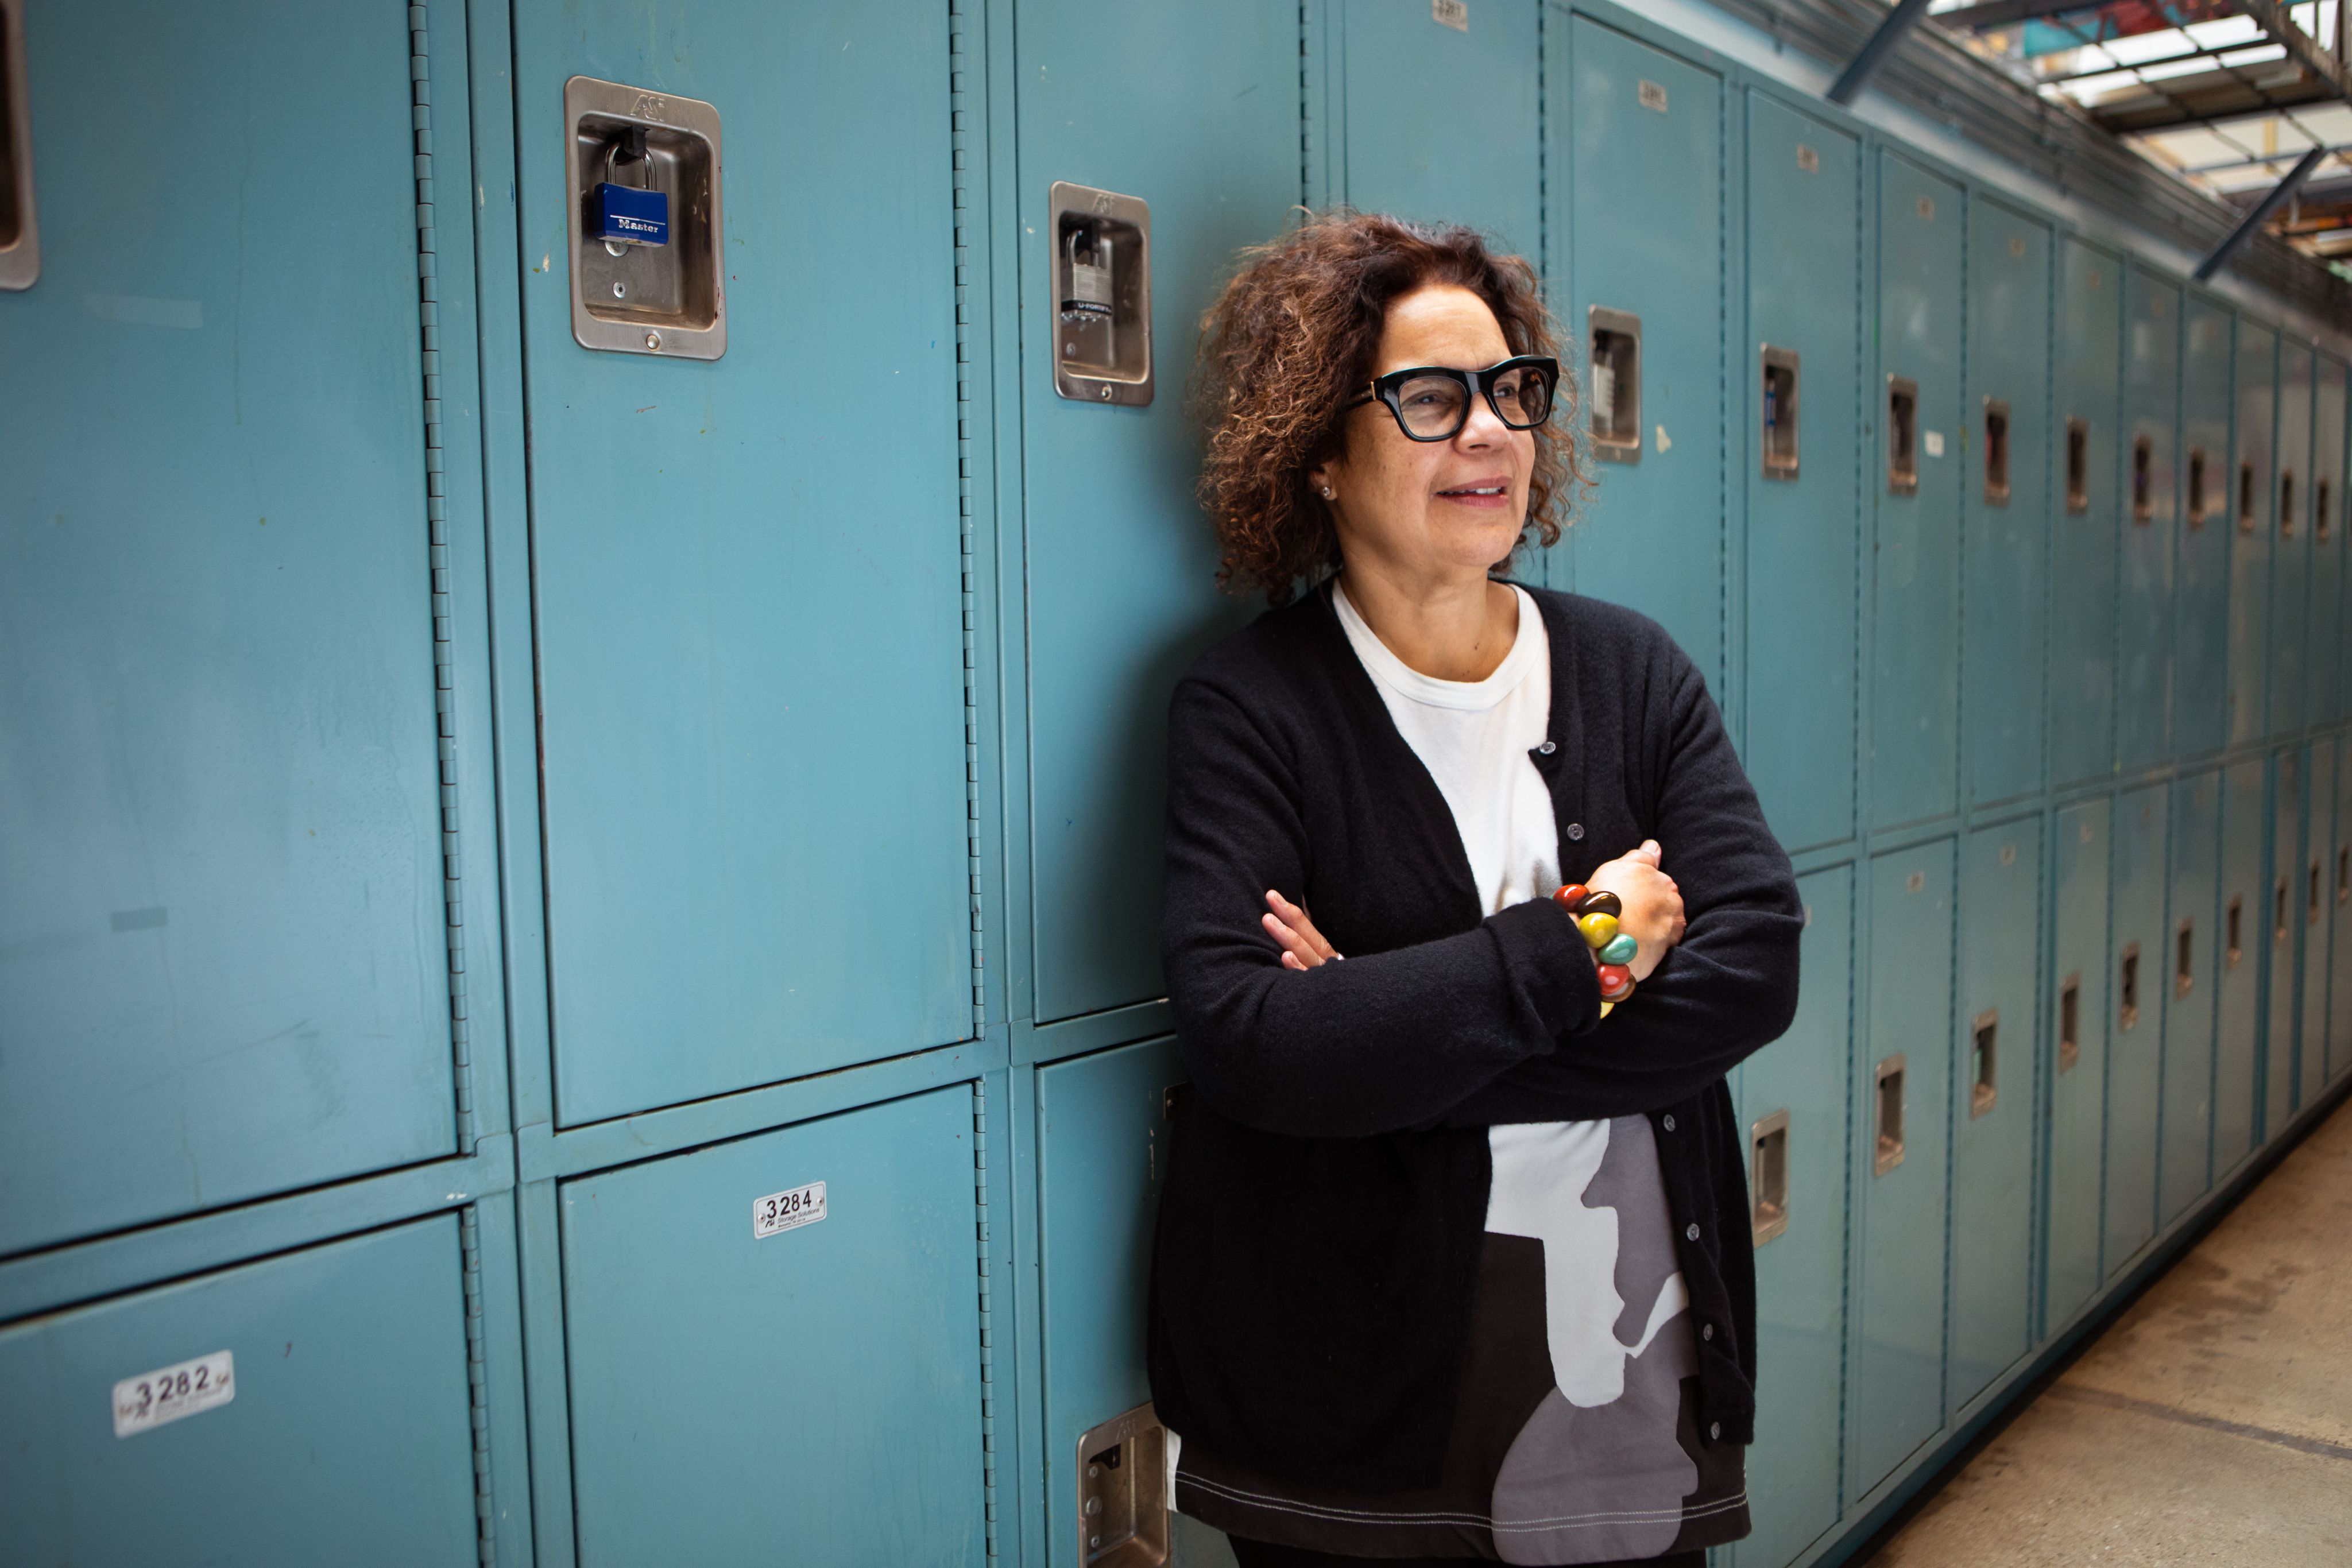 Professor Candida Alvarez stands in front of a line of blue lockers